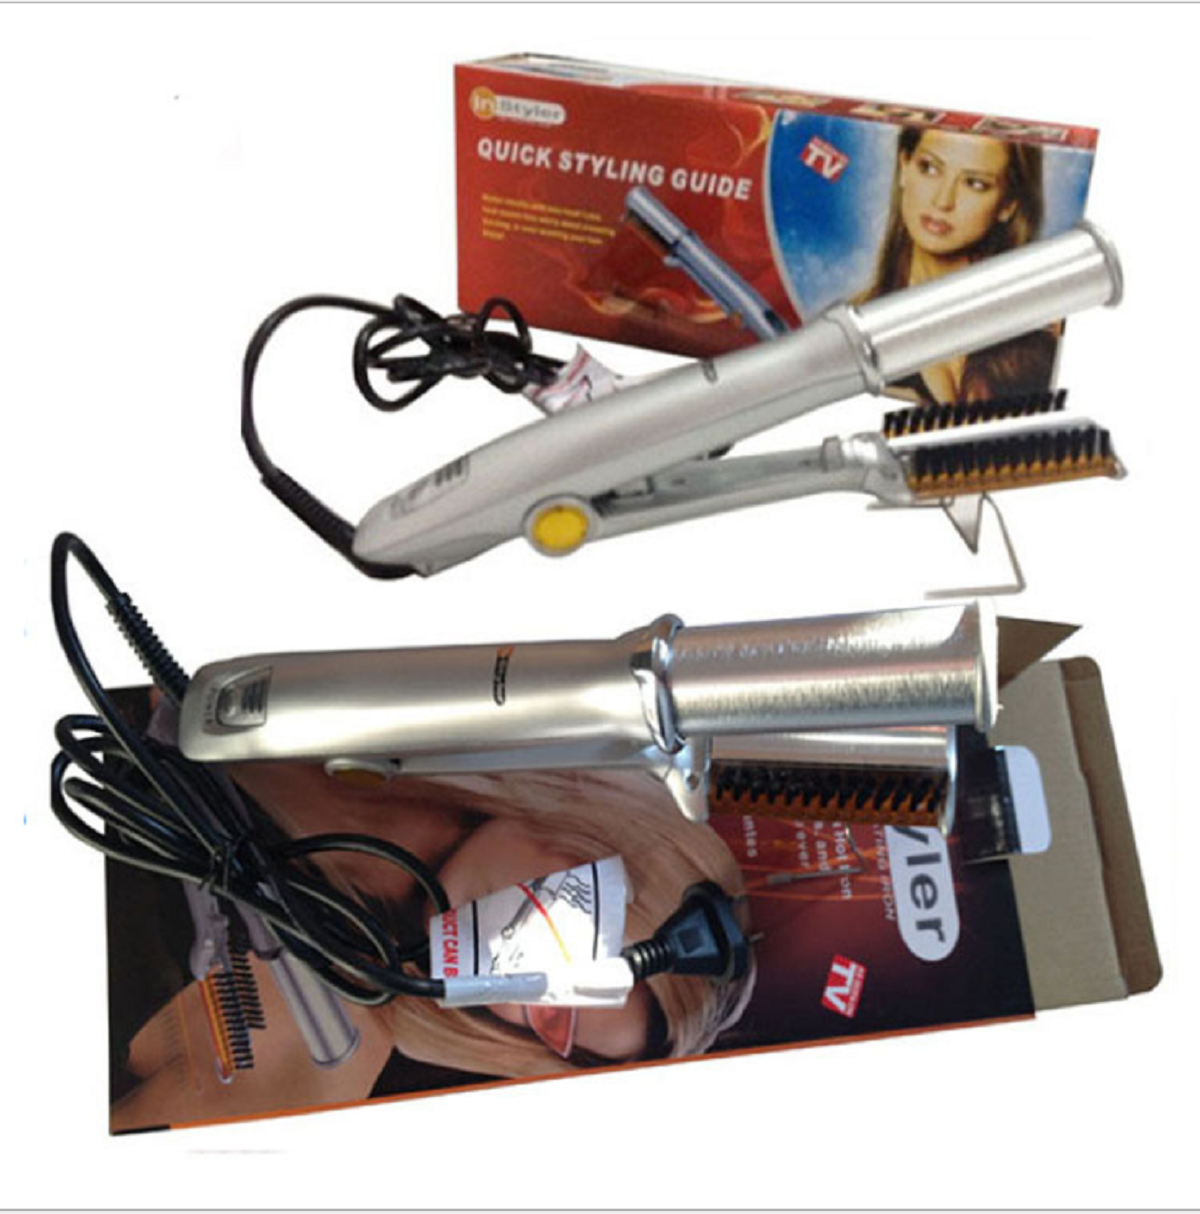 Dry and wet straight curling bar flow sea comb steam two in one Instyler curler